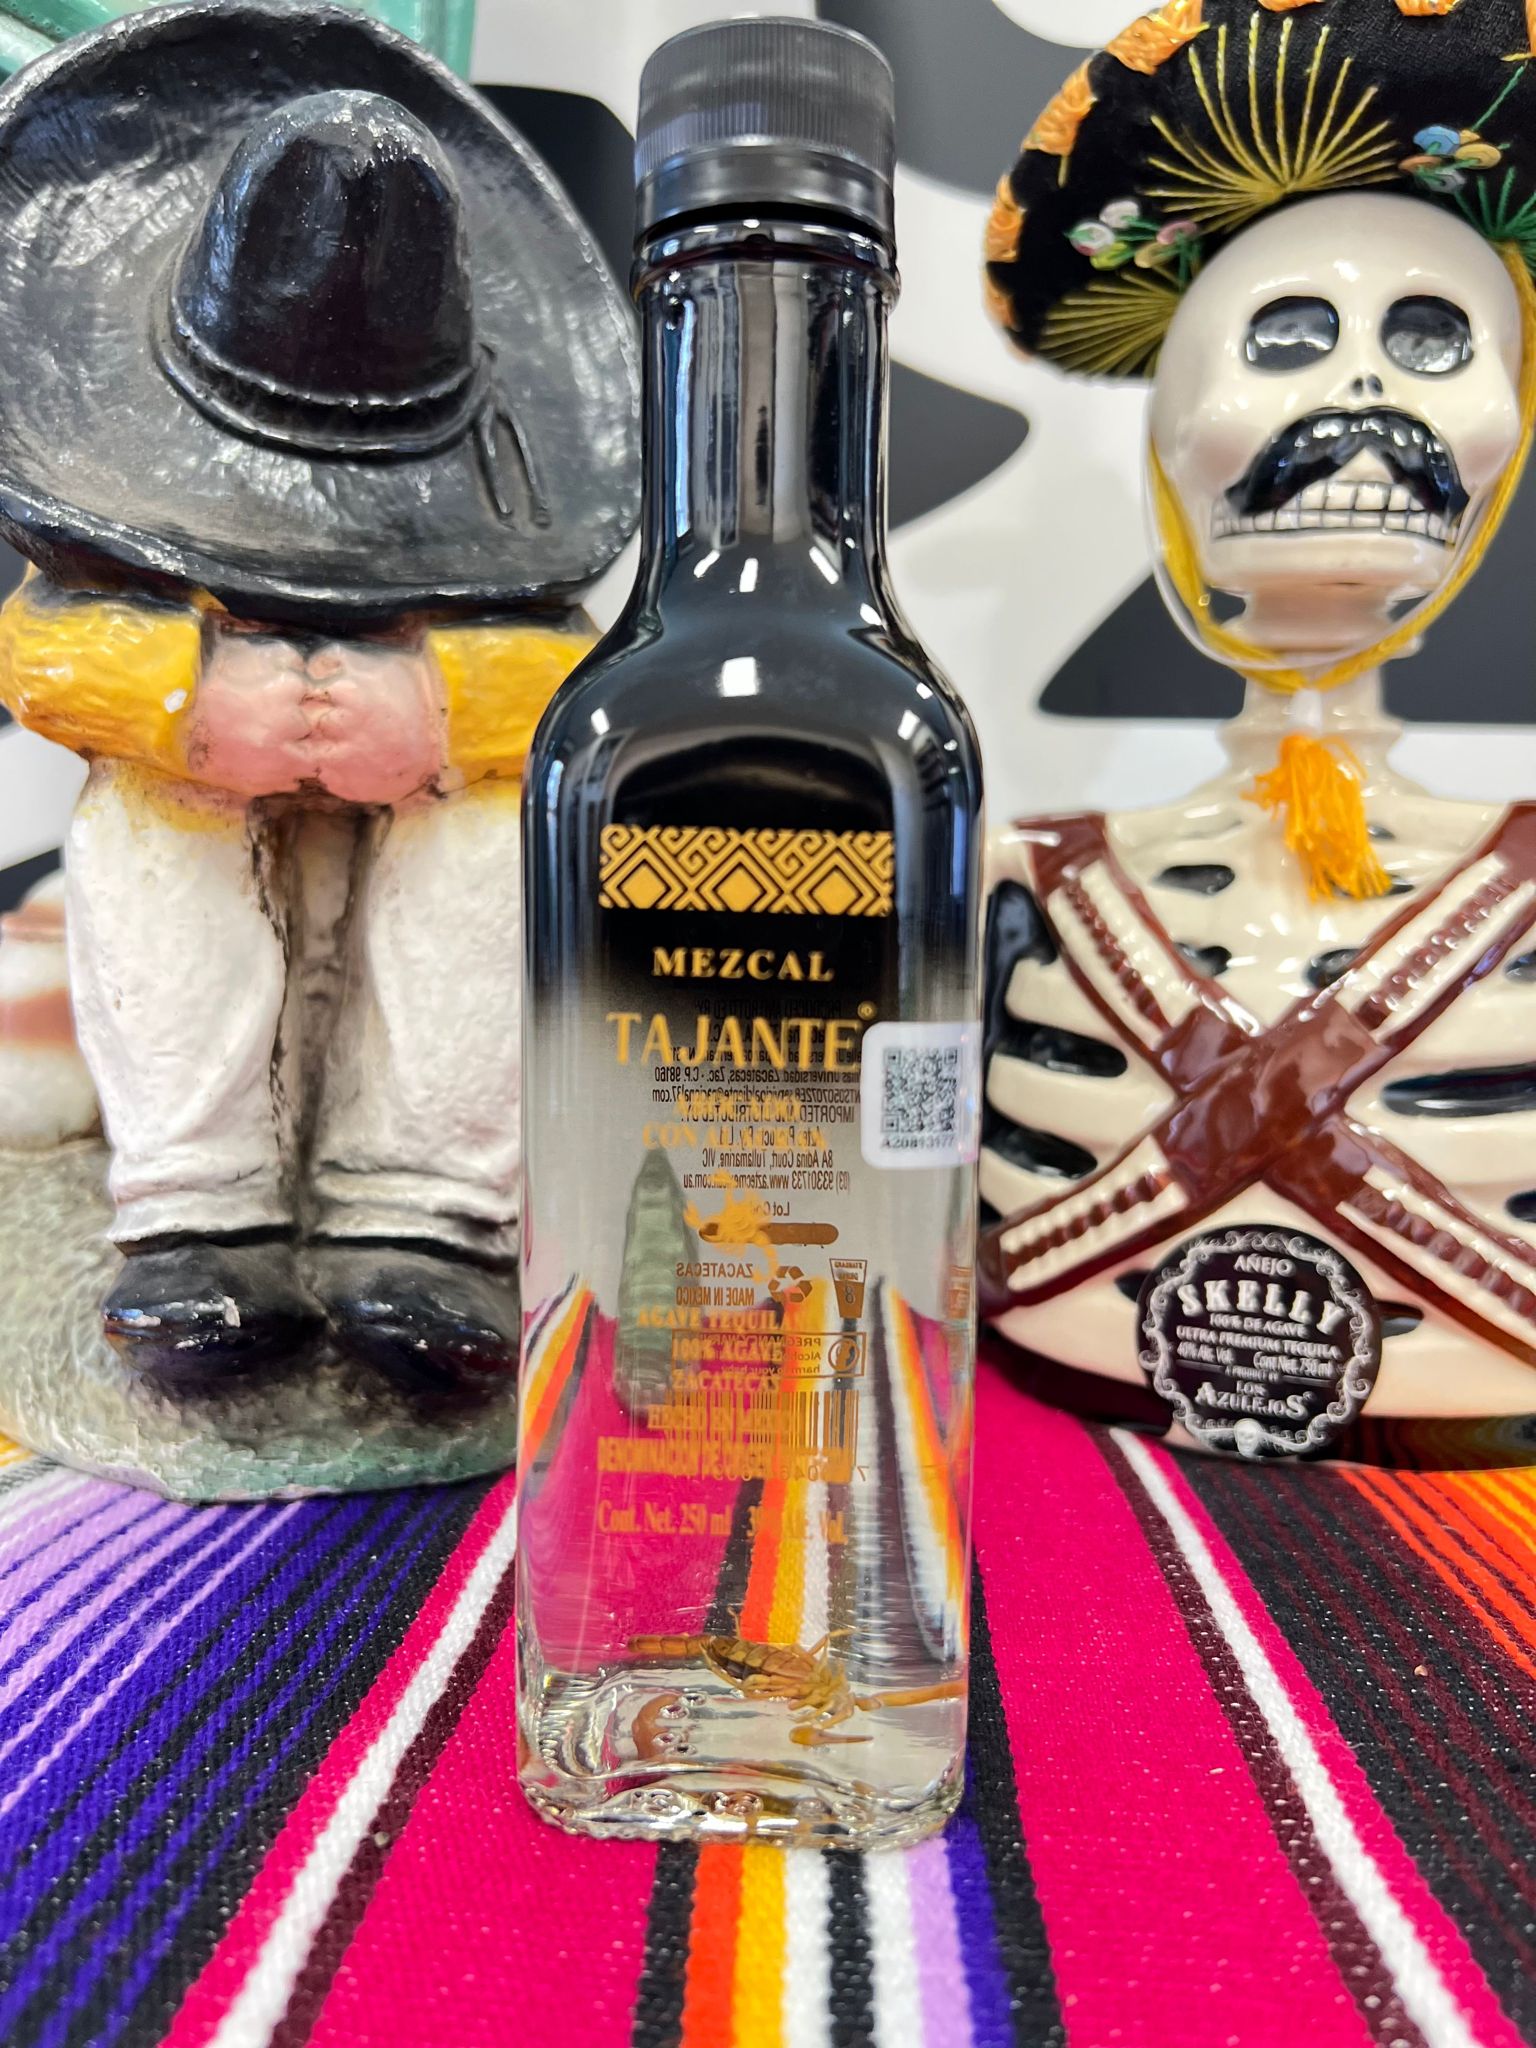 TAJANTE MEZCAL WITH ALACRAN 39% 250ML - Aztec Mexican Products and ...